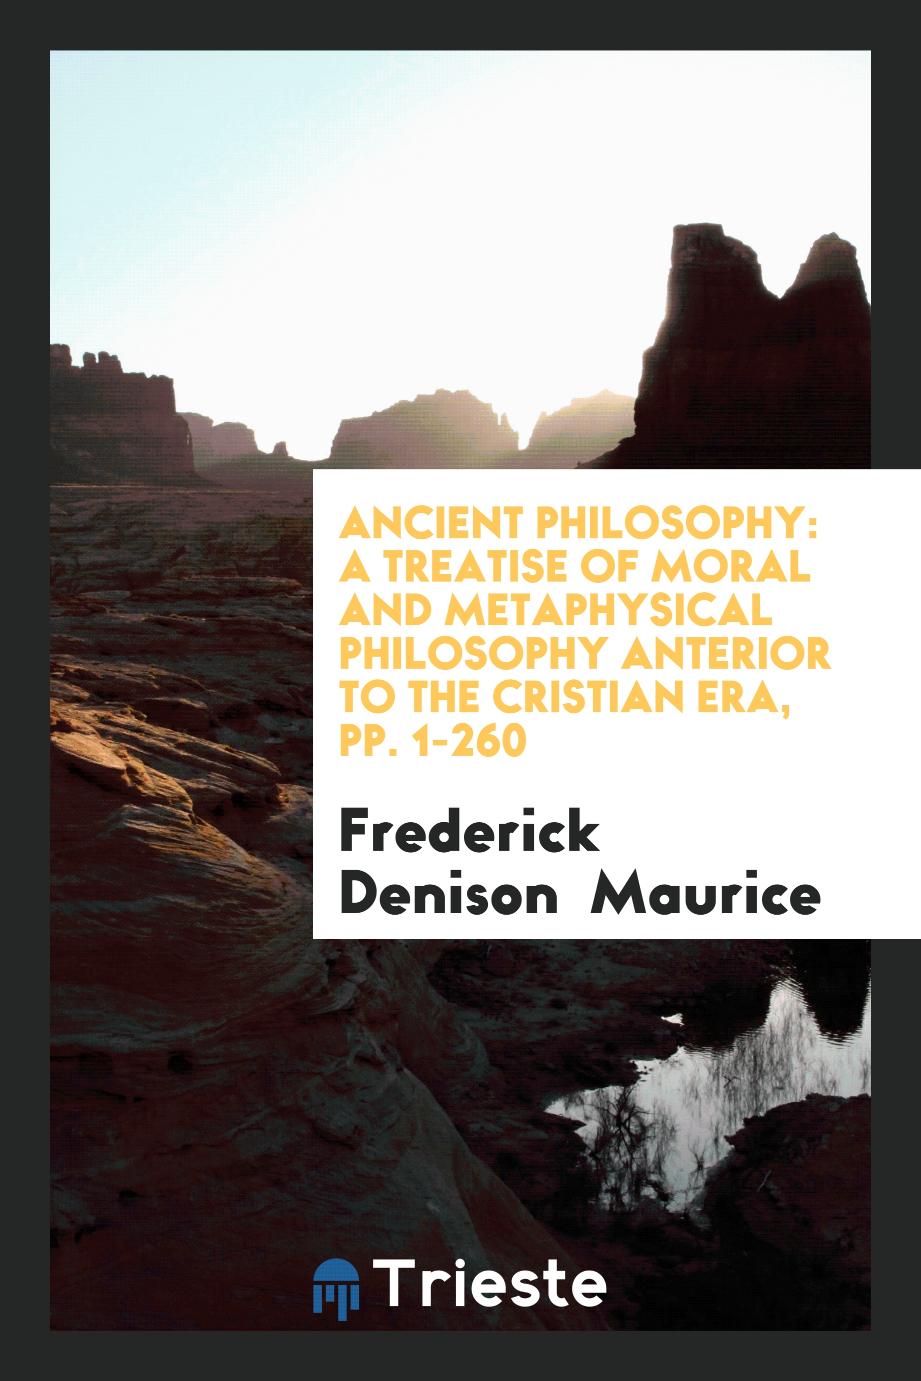 Ancient Philosophy: A Treatise of Moral and Metaphysical Philosophy Anterior to the Cristian Era, pp. 1-260